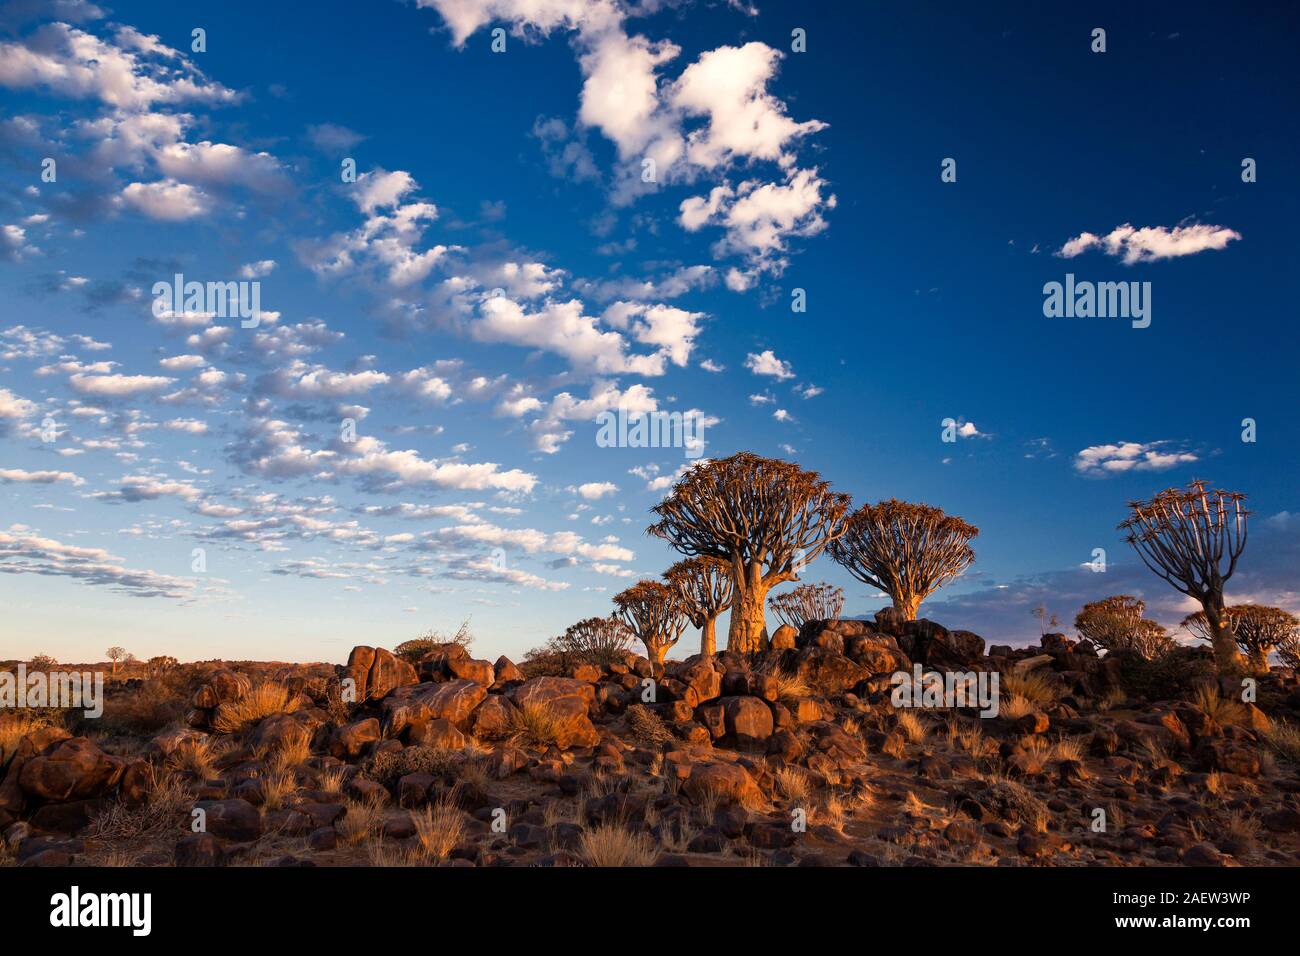 Quiver Tree Forest, Aloe dichotoma, early morning, Keetmanshoop, Karas Region, Namibia, Southern Africa, Africa Stock Photo